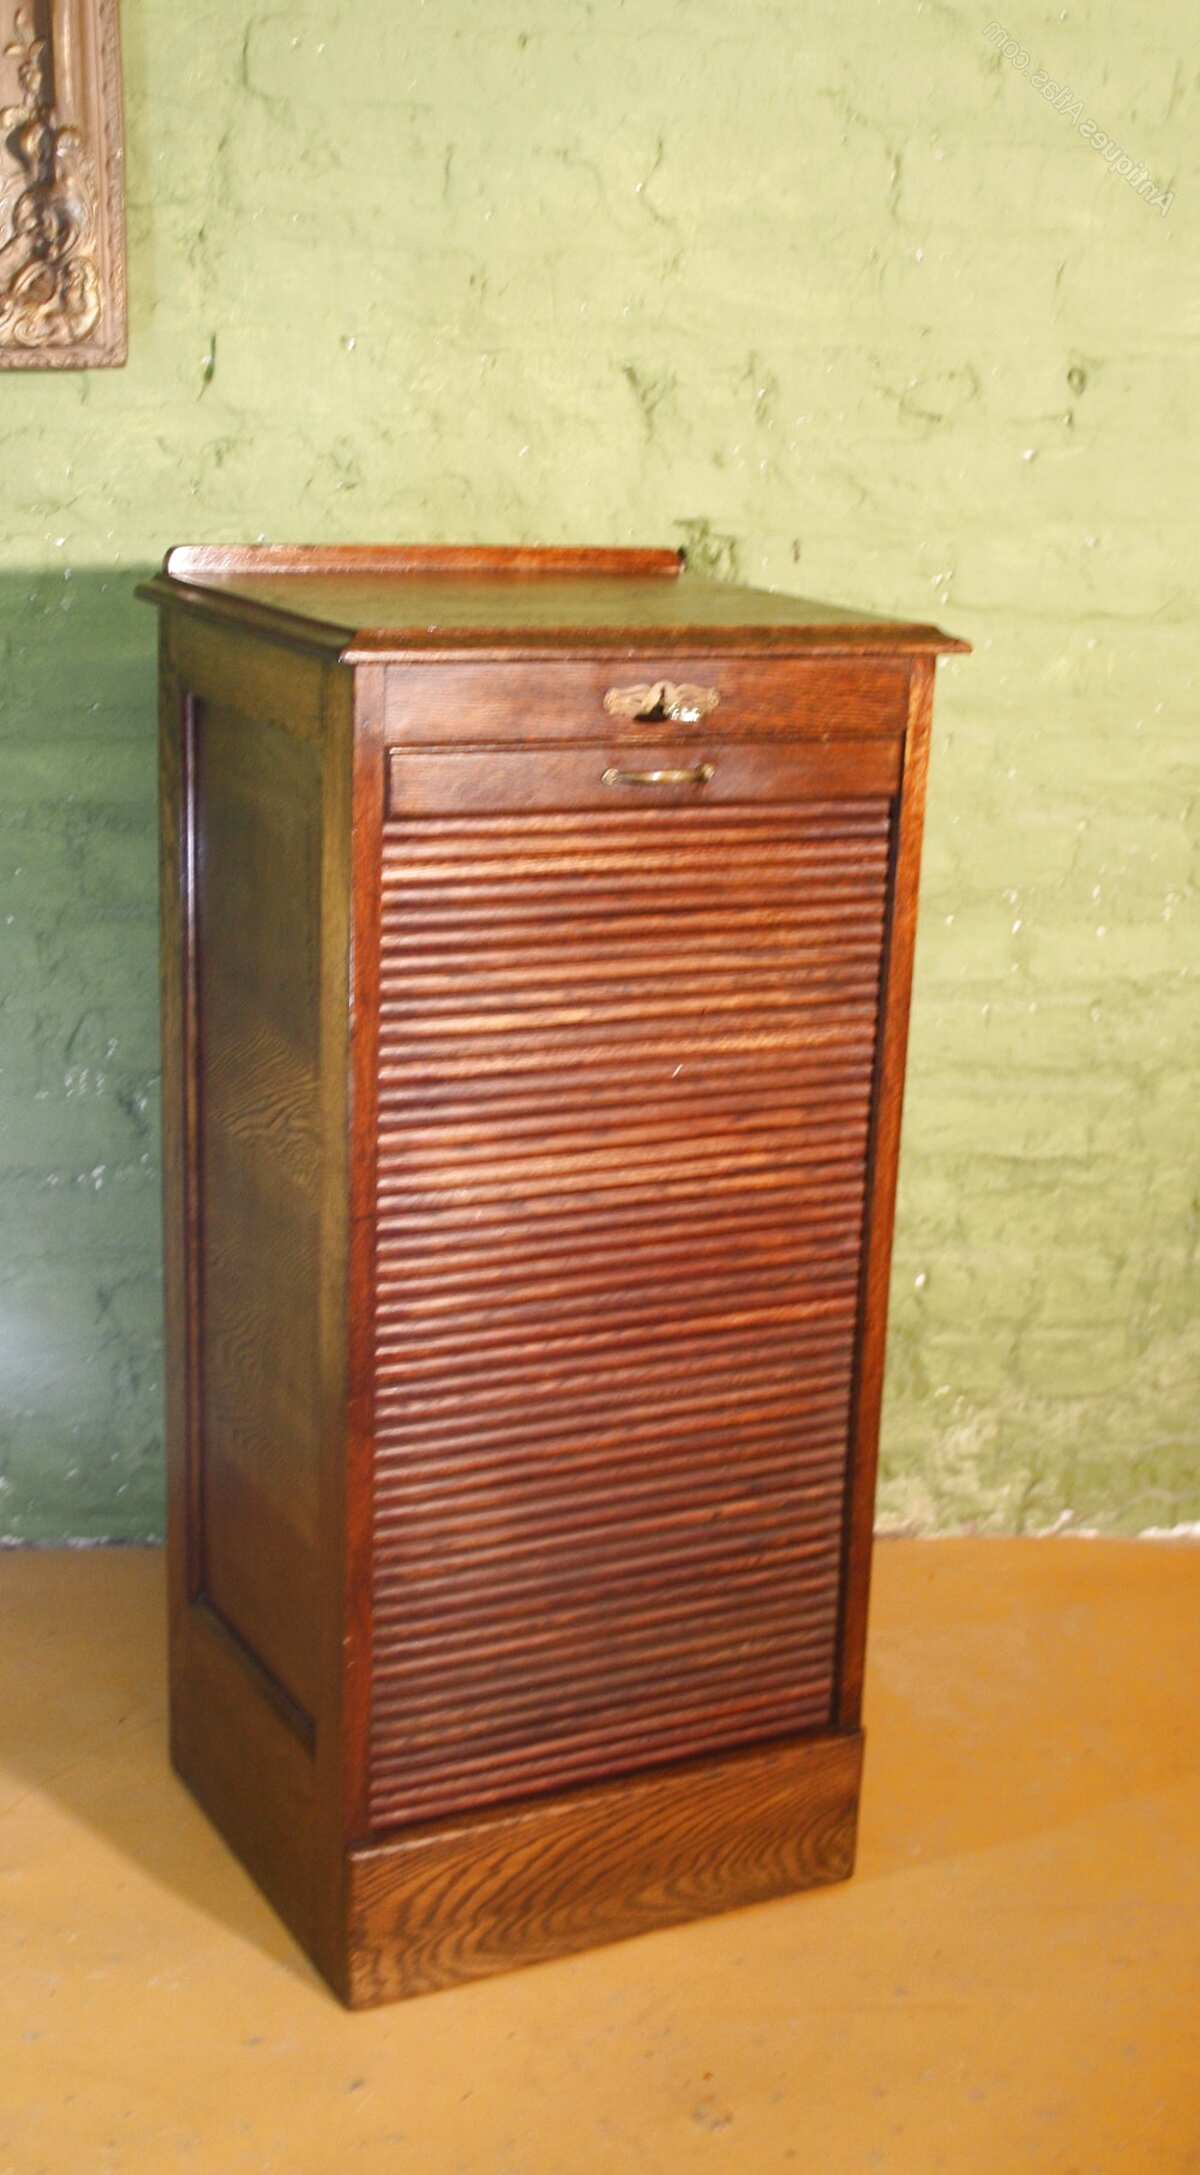 Vintage Tambour Cabinet For Sale In Uk View 51 Bargains